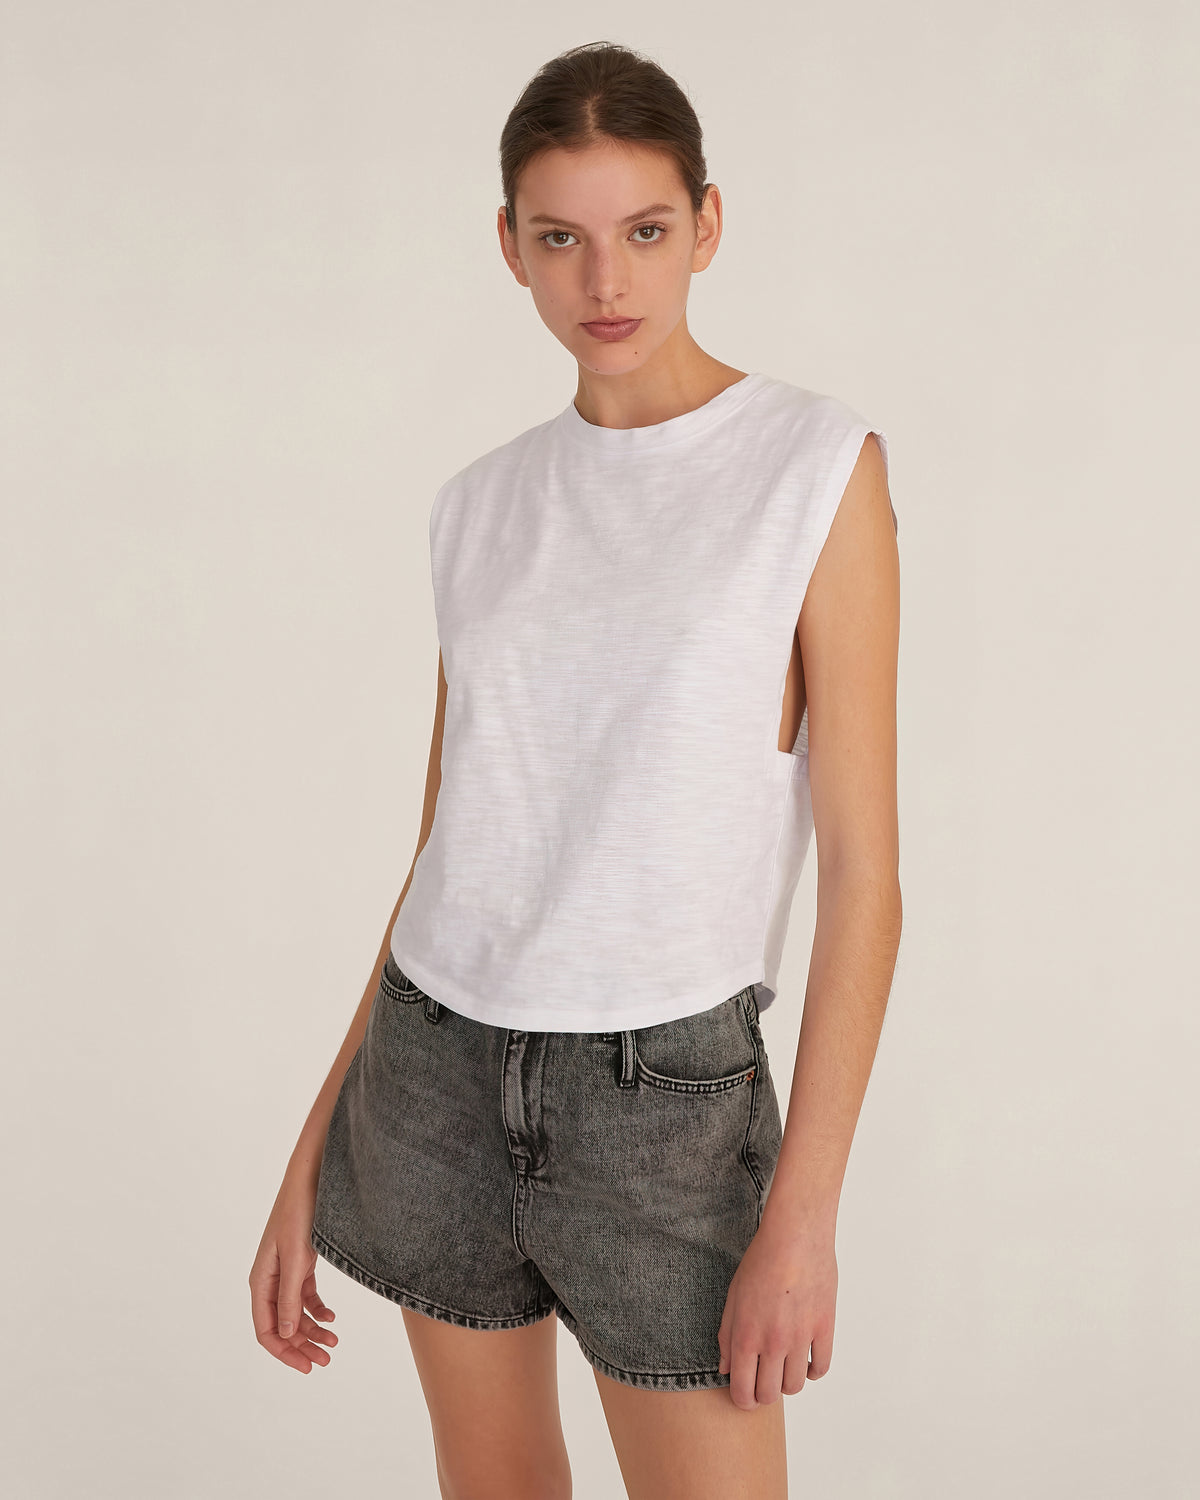 So Relaxed Slub Jersey Muscle Tee in White